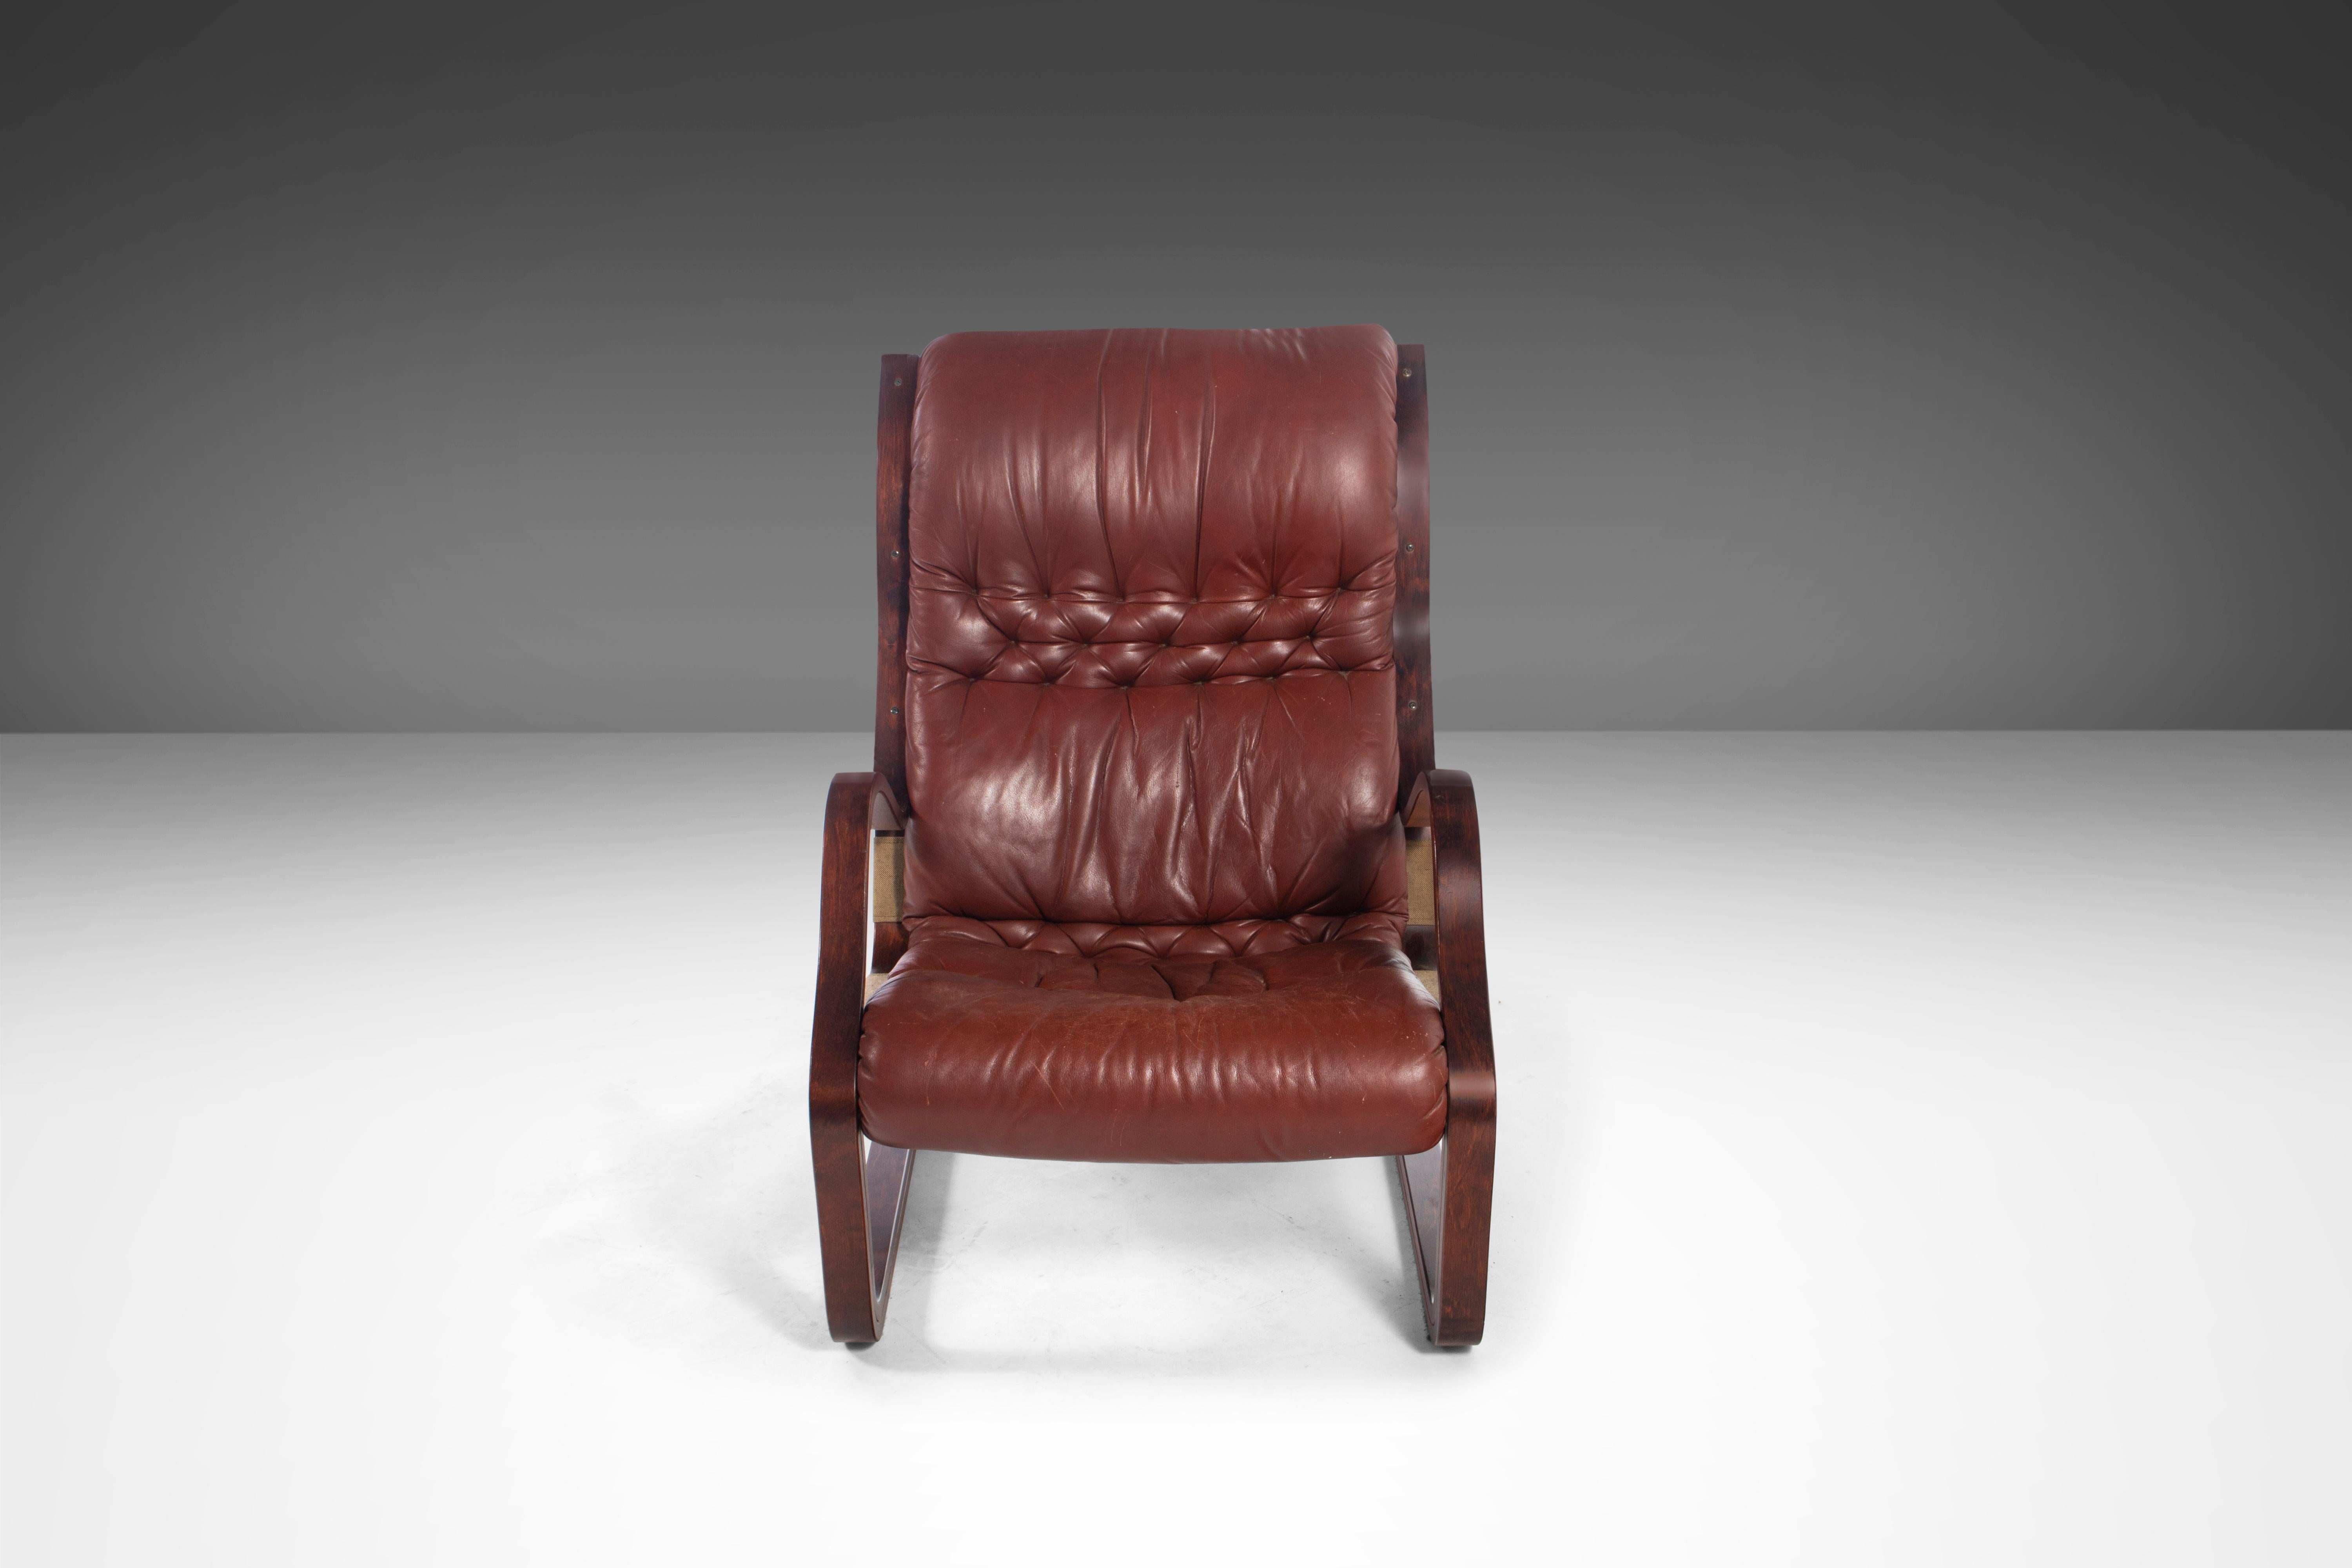 This absolutely exquisite 'Koivutaru' armchair with matching ottoman from the 70's in the rare combination of afromosia and oxblood red leather was ahead of it's time. Designed by the visionary Finnish designer Esko Pajamies for Asko in 1977, this